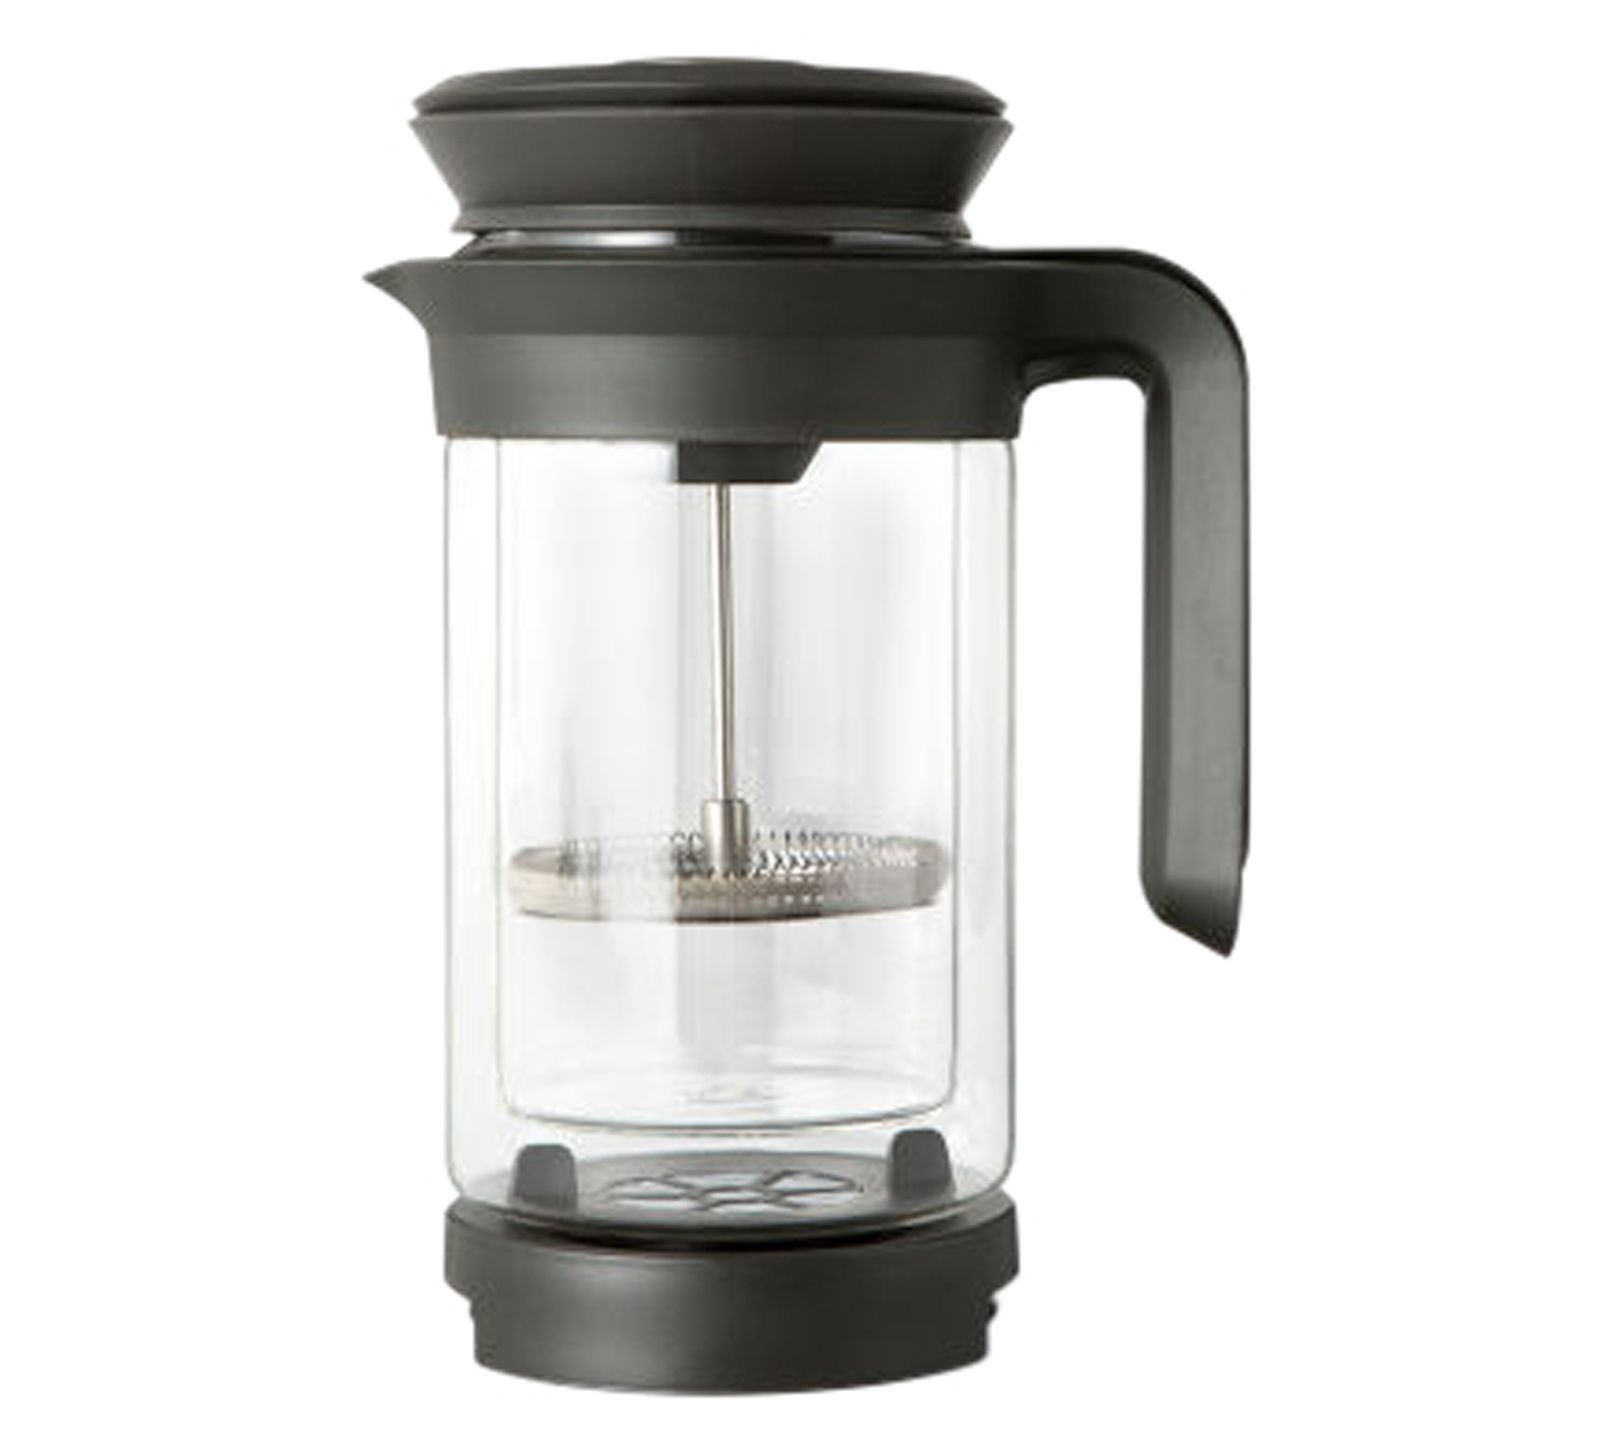 The London Sip French Press Immersion Brewer Coffee Maker with Stainless Steel Filter System, 34oz, Black